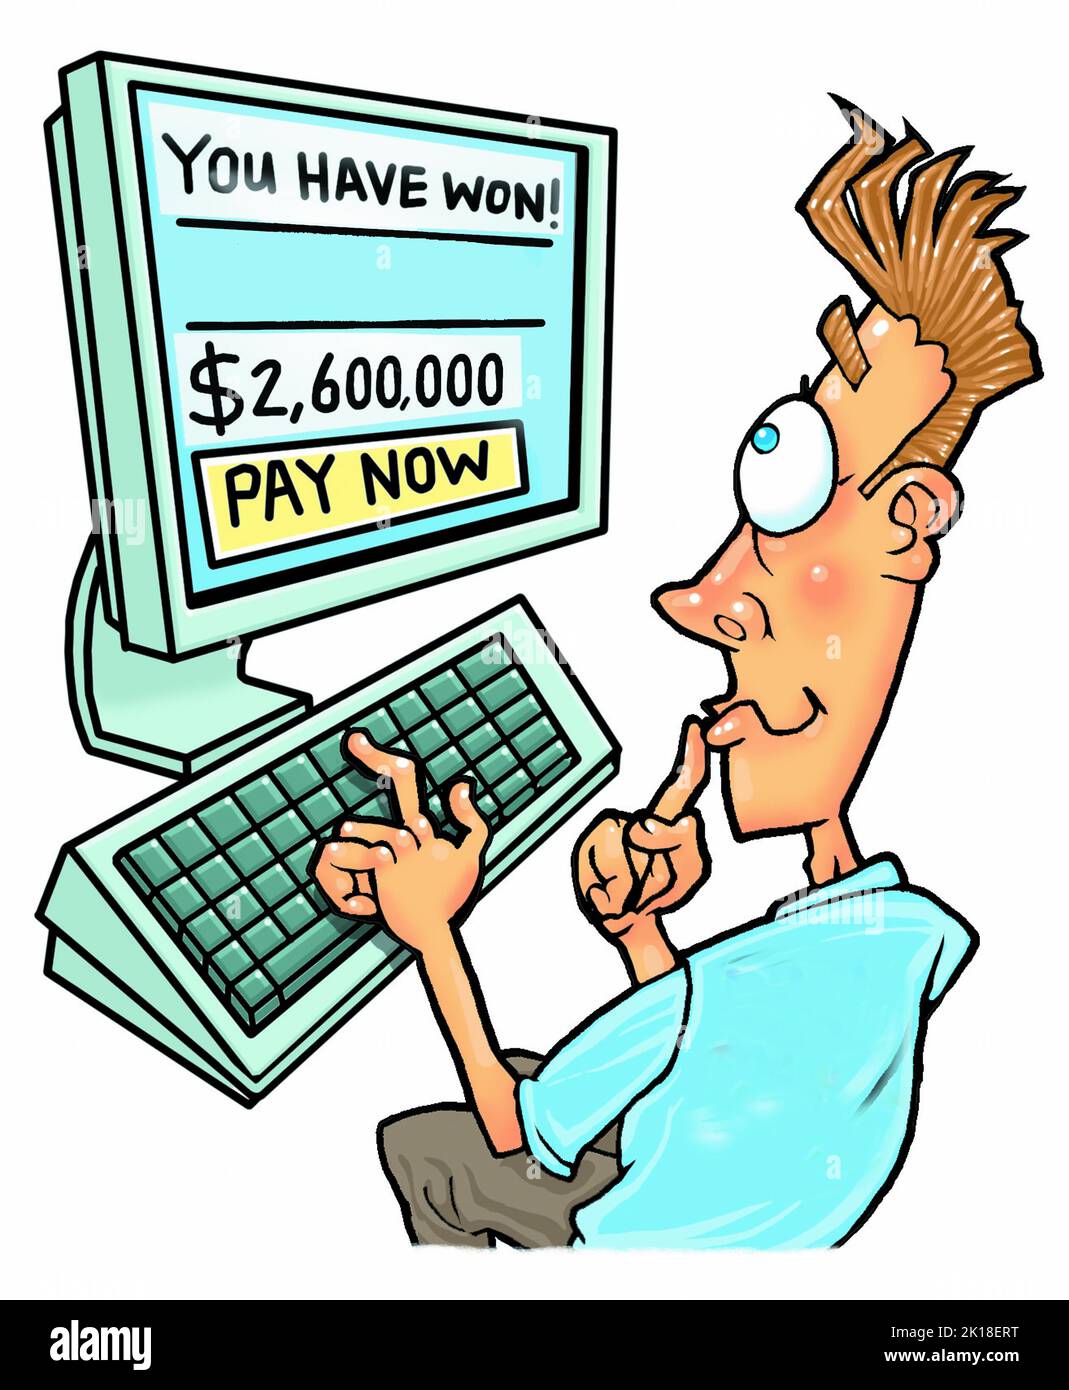 Cartoon art showing man, sat at PC, bidding & winning on an online auction, maybe worried he's paid too much, in the heat of the moment buyer's regret Stock Photo